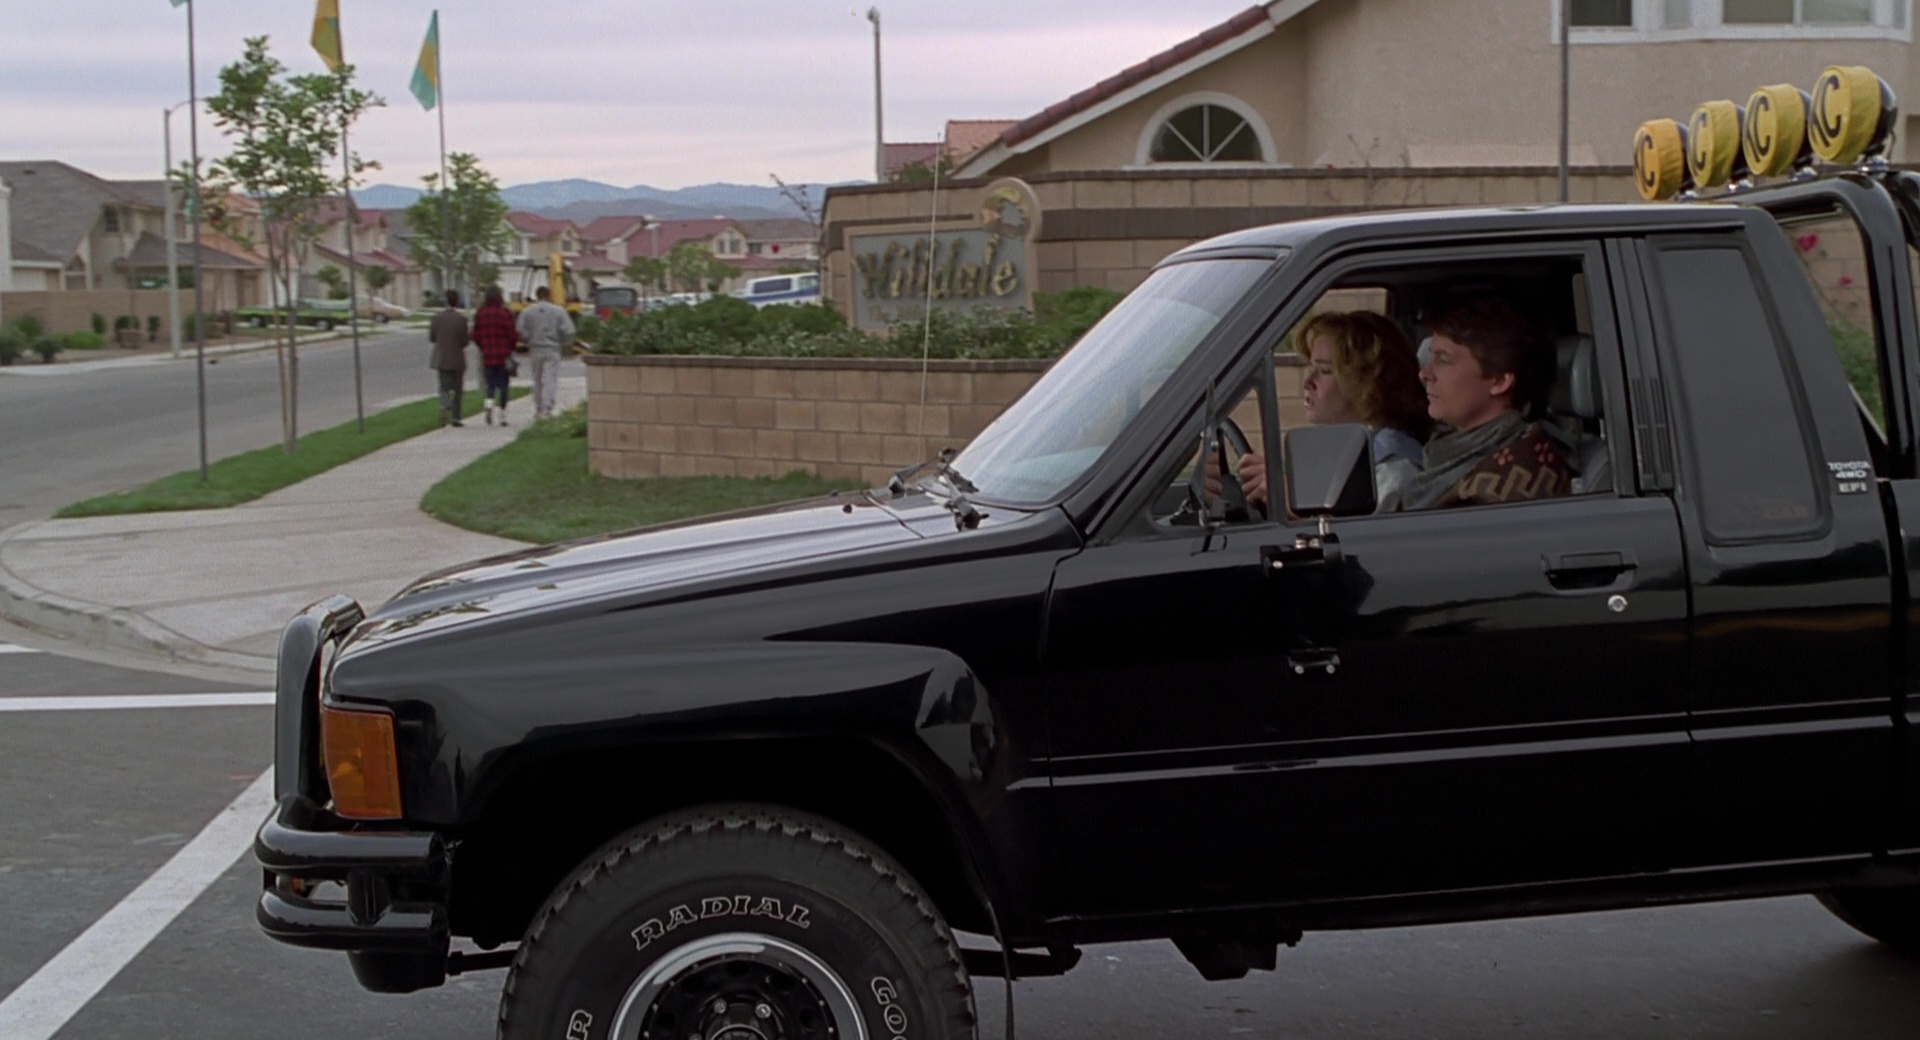 Toyota SR5 Pickup Truck Used by Michael J. Fox (Marty McFly) in Back to the Future ...